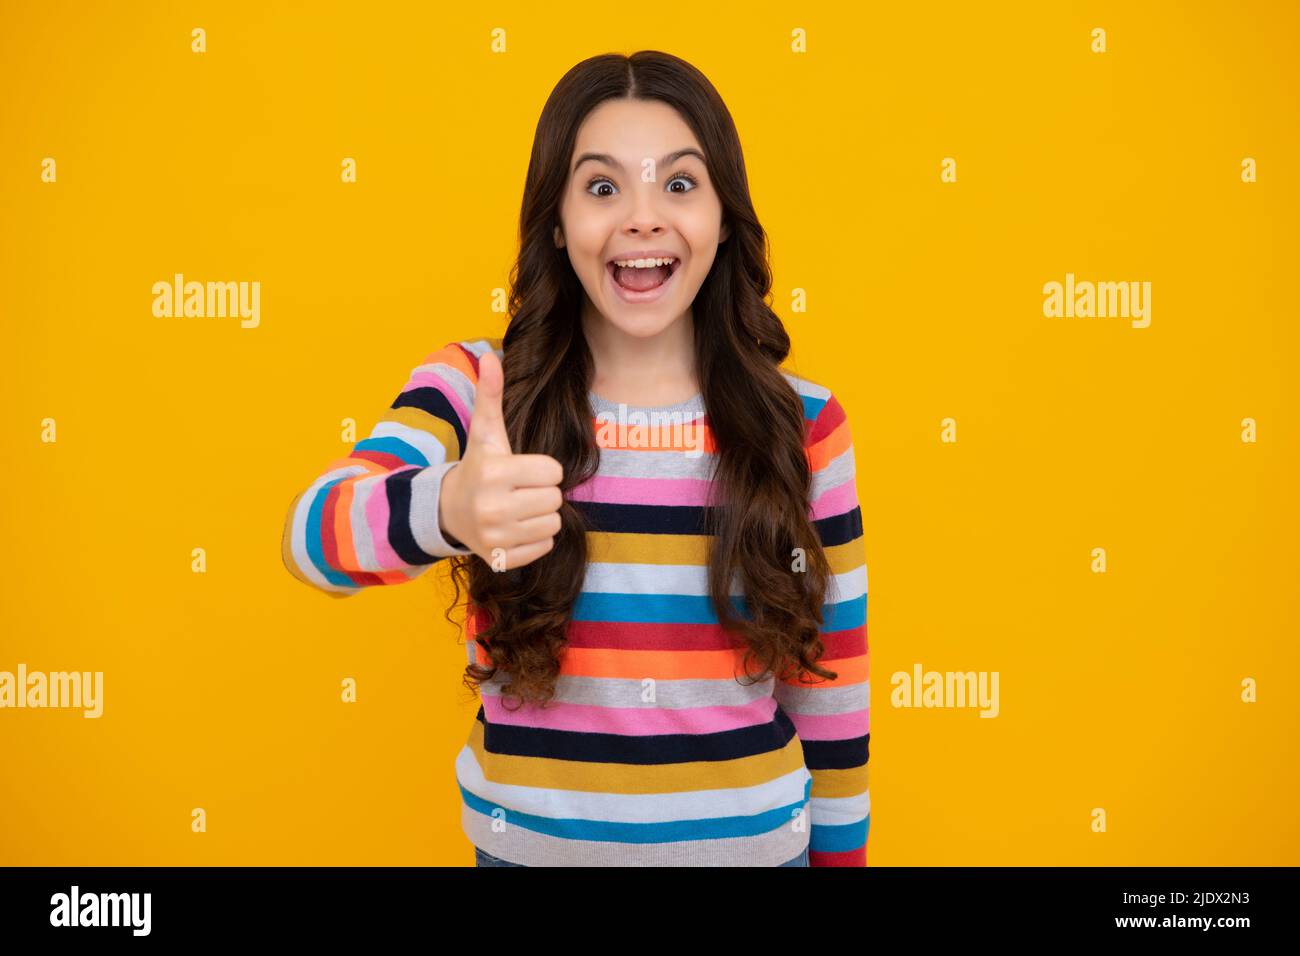 Amazed teenager. Excited teen girl. Happy casual teenager child girl showing thumb up and smiling isolated on yellow background. Stock Photo